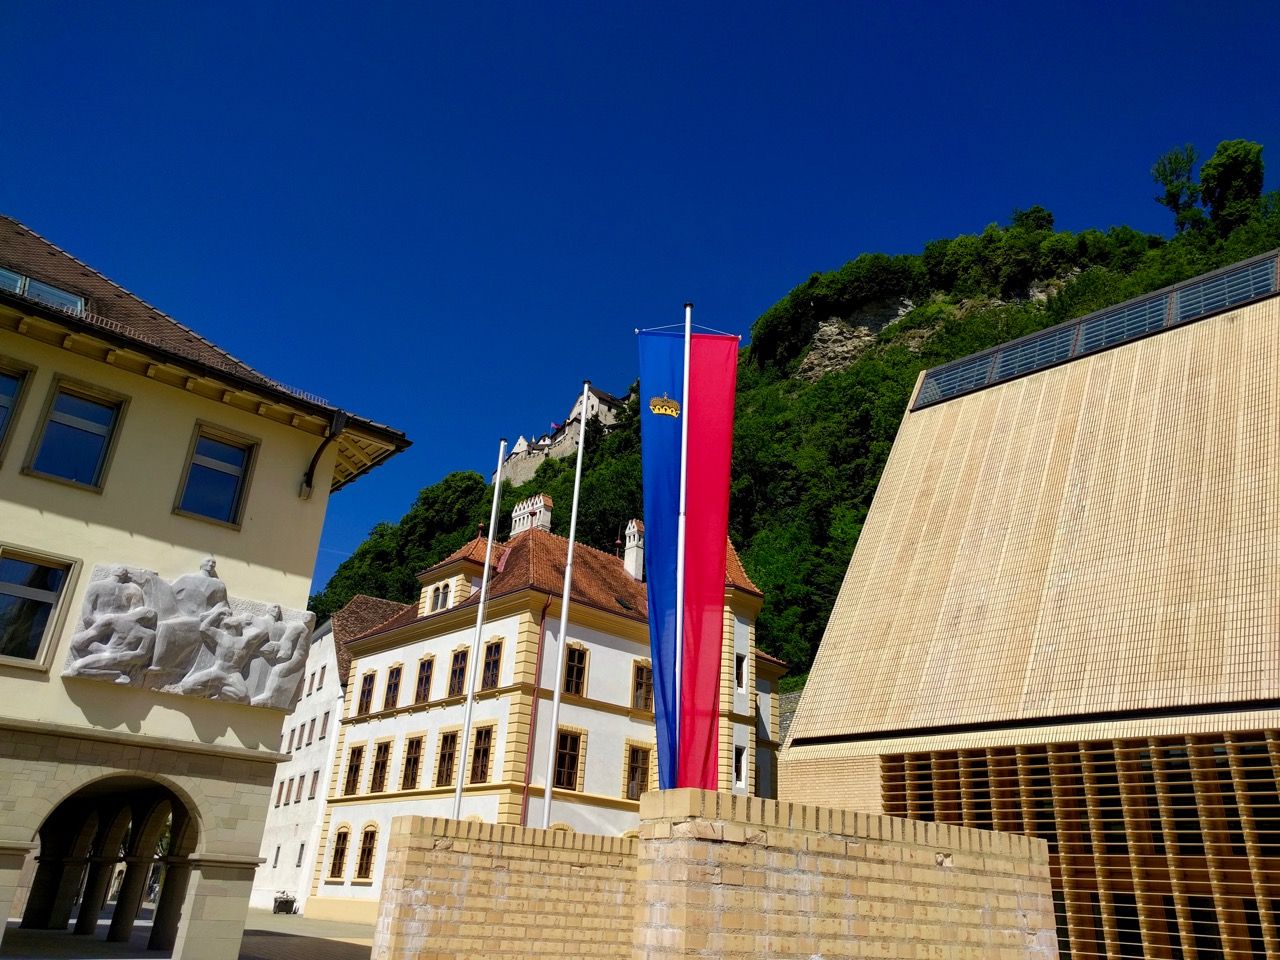 Parliment building of Liechtenstein with a flag in the foreground.